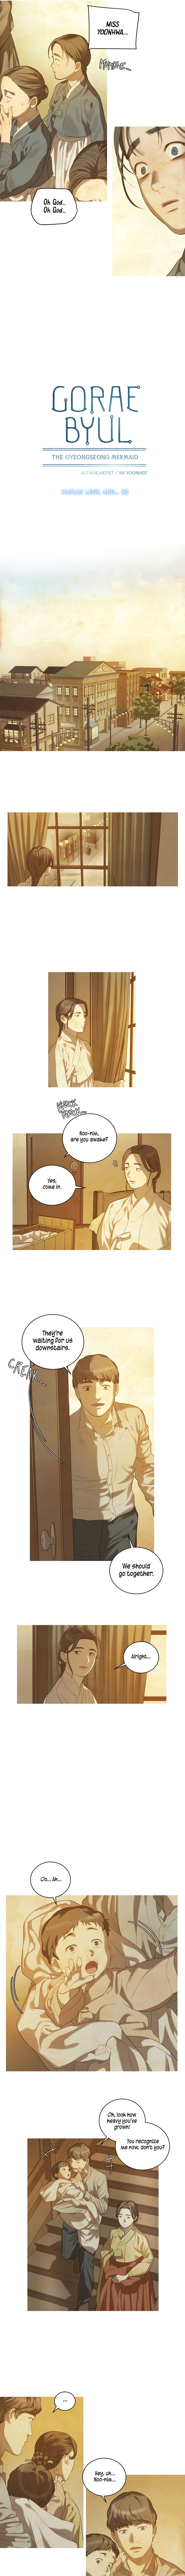 The Whale Star - The Gyeongseong Mermaid - Chapter 14 Page 4